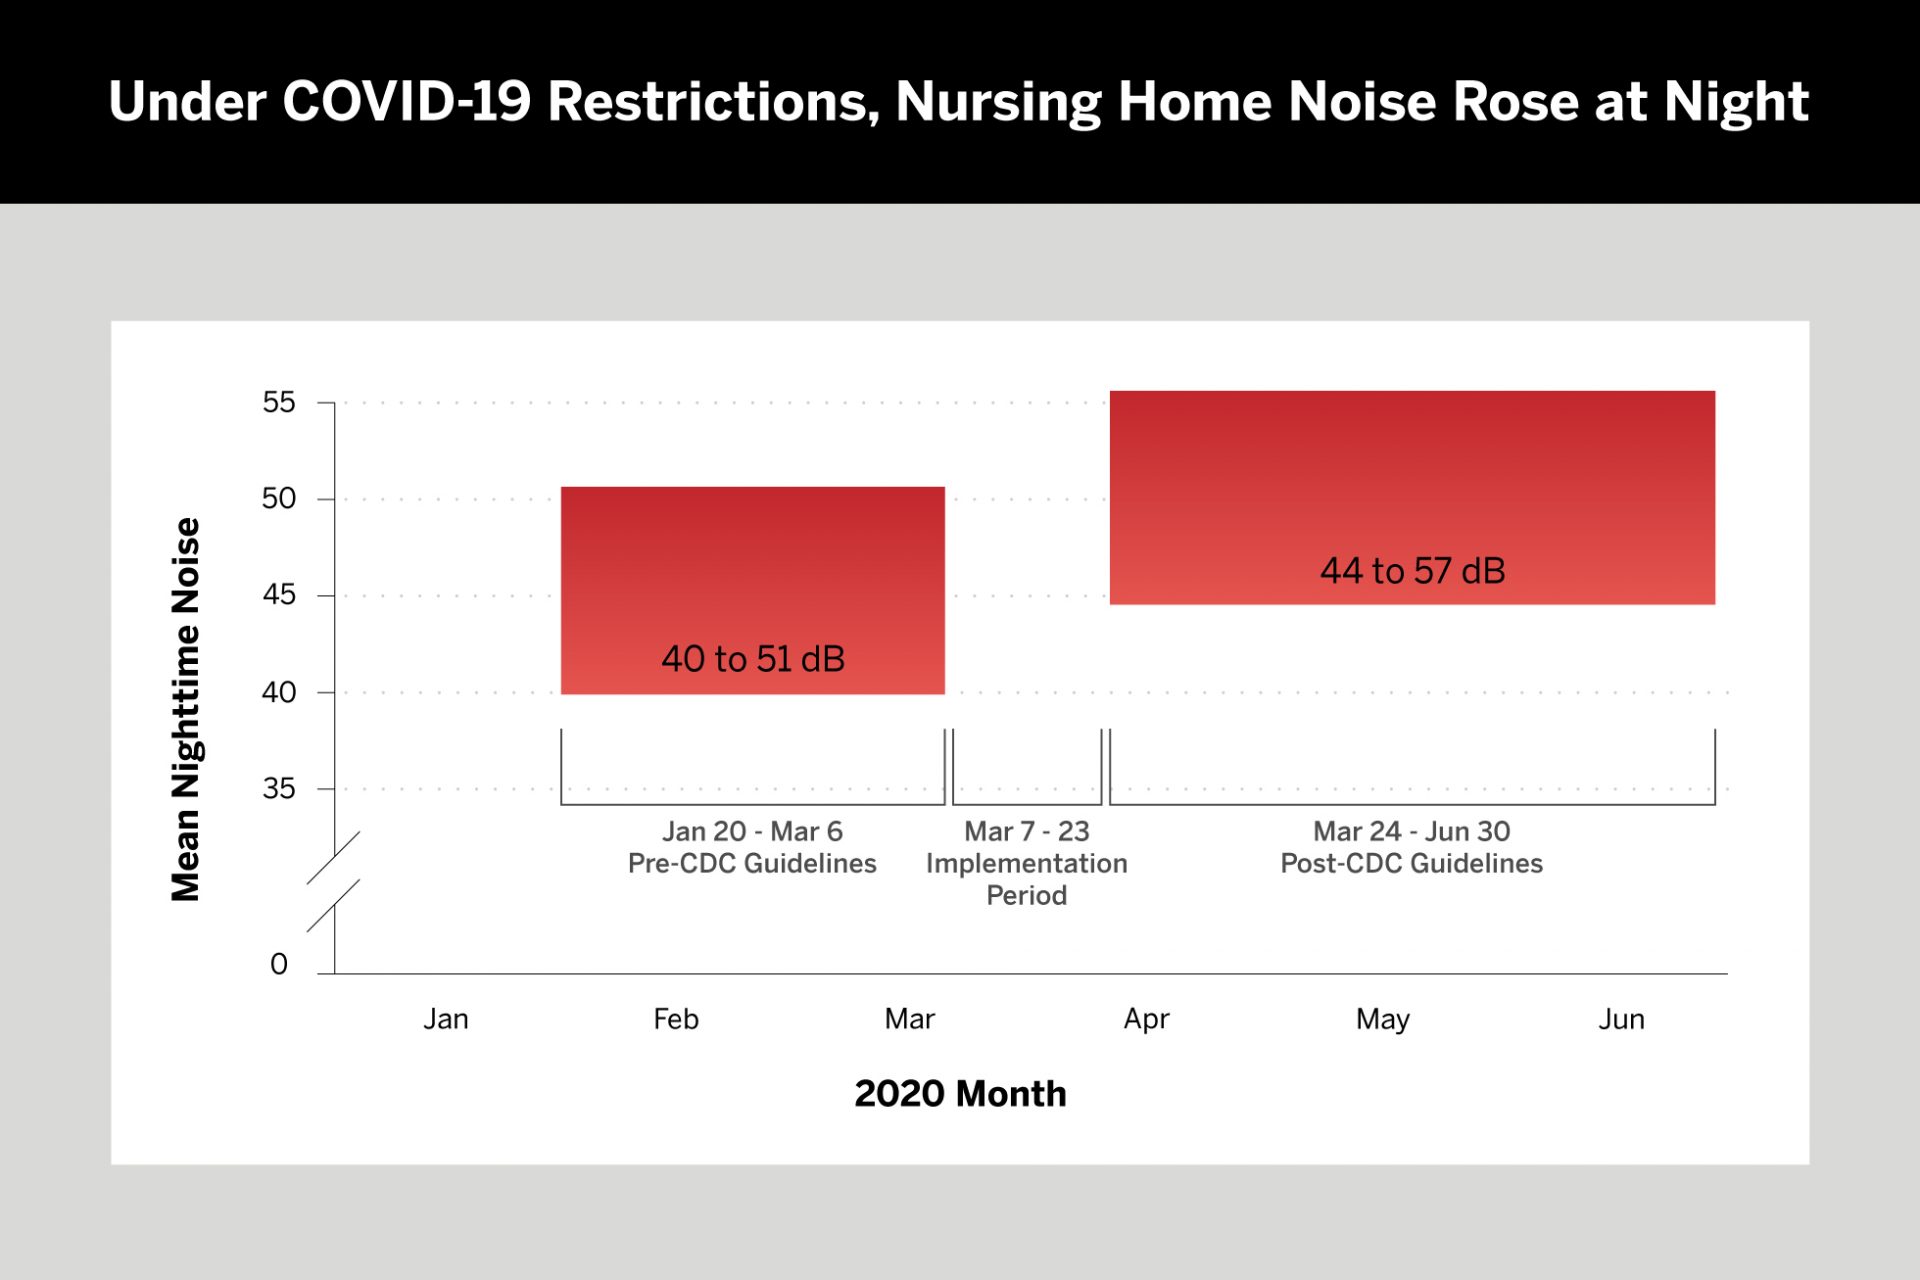 Before COVID-19-related restrictions were introduced in March of 2020, the mean nighttime noise level across 6 units in 2 NYC nursing home facilities ranged from 40 to 51 decibels (dB). After restrictions were implemented, those levels rose to 44 to 57 dB. ADAPTED FROM: JAMDA. 2021 May;22:P974-976.